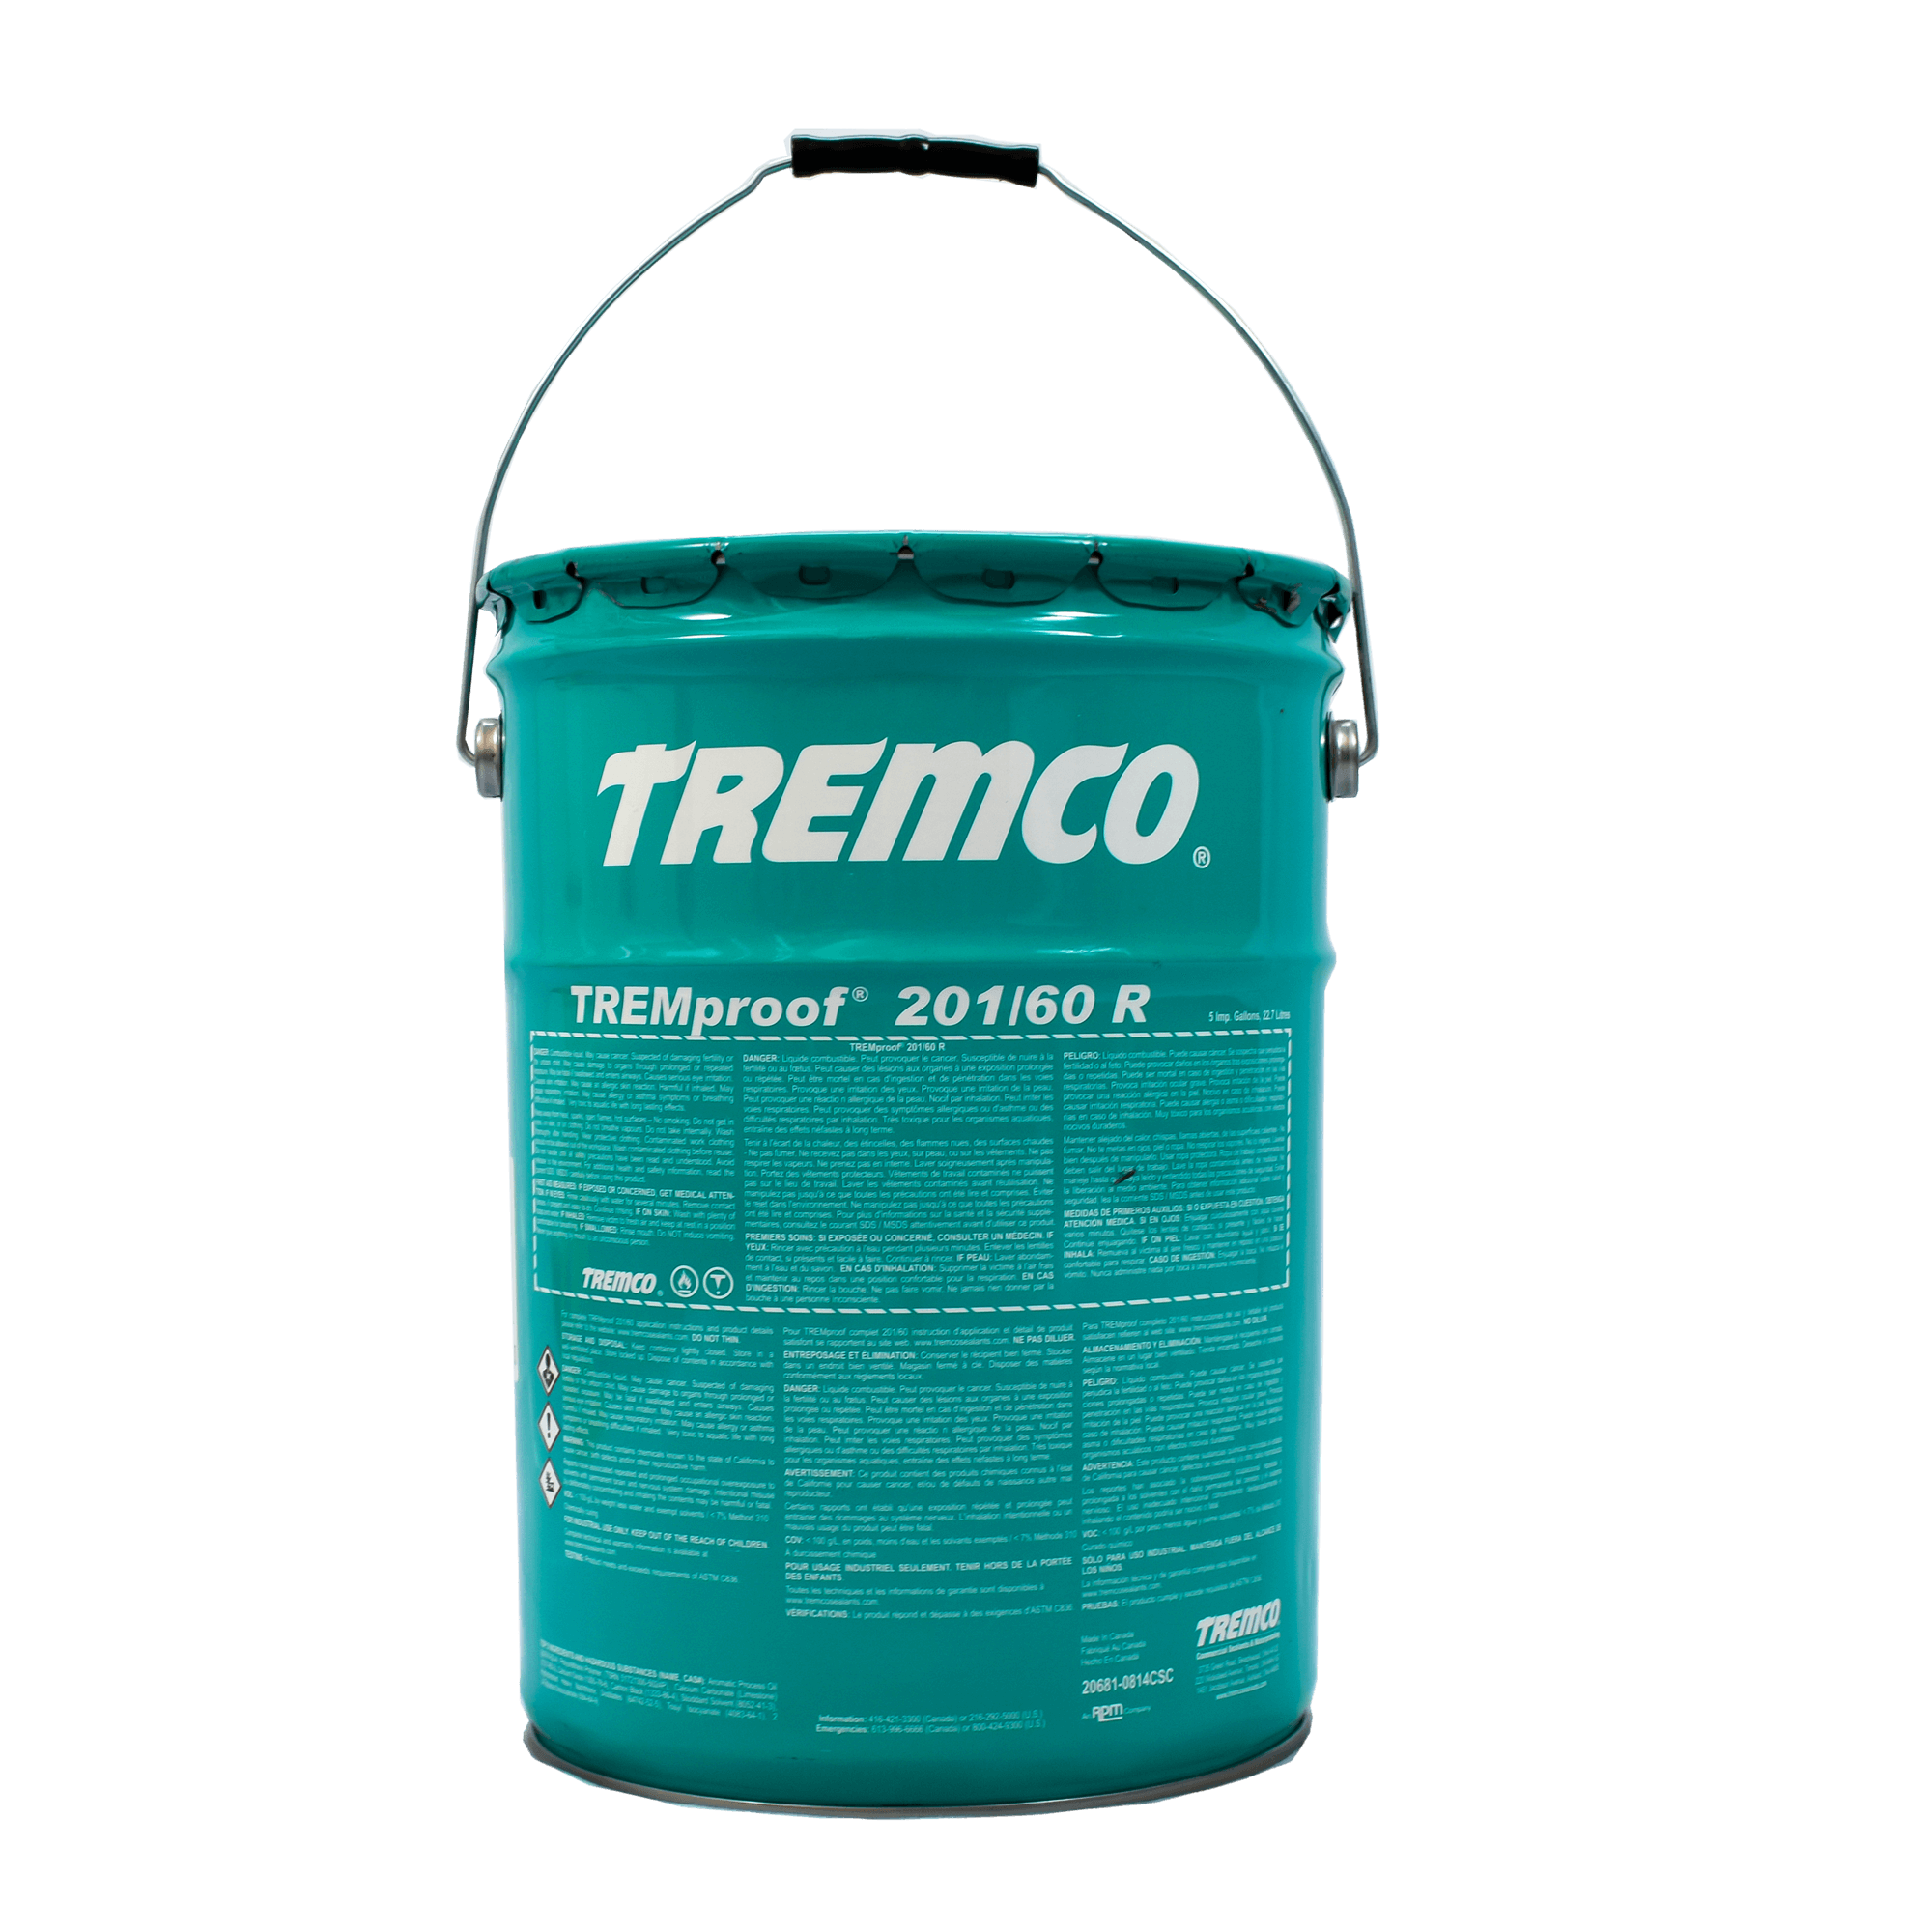 Tremproof 201/60 R